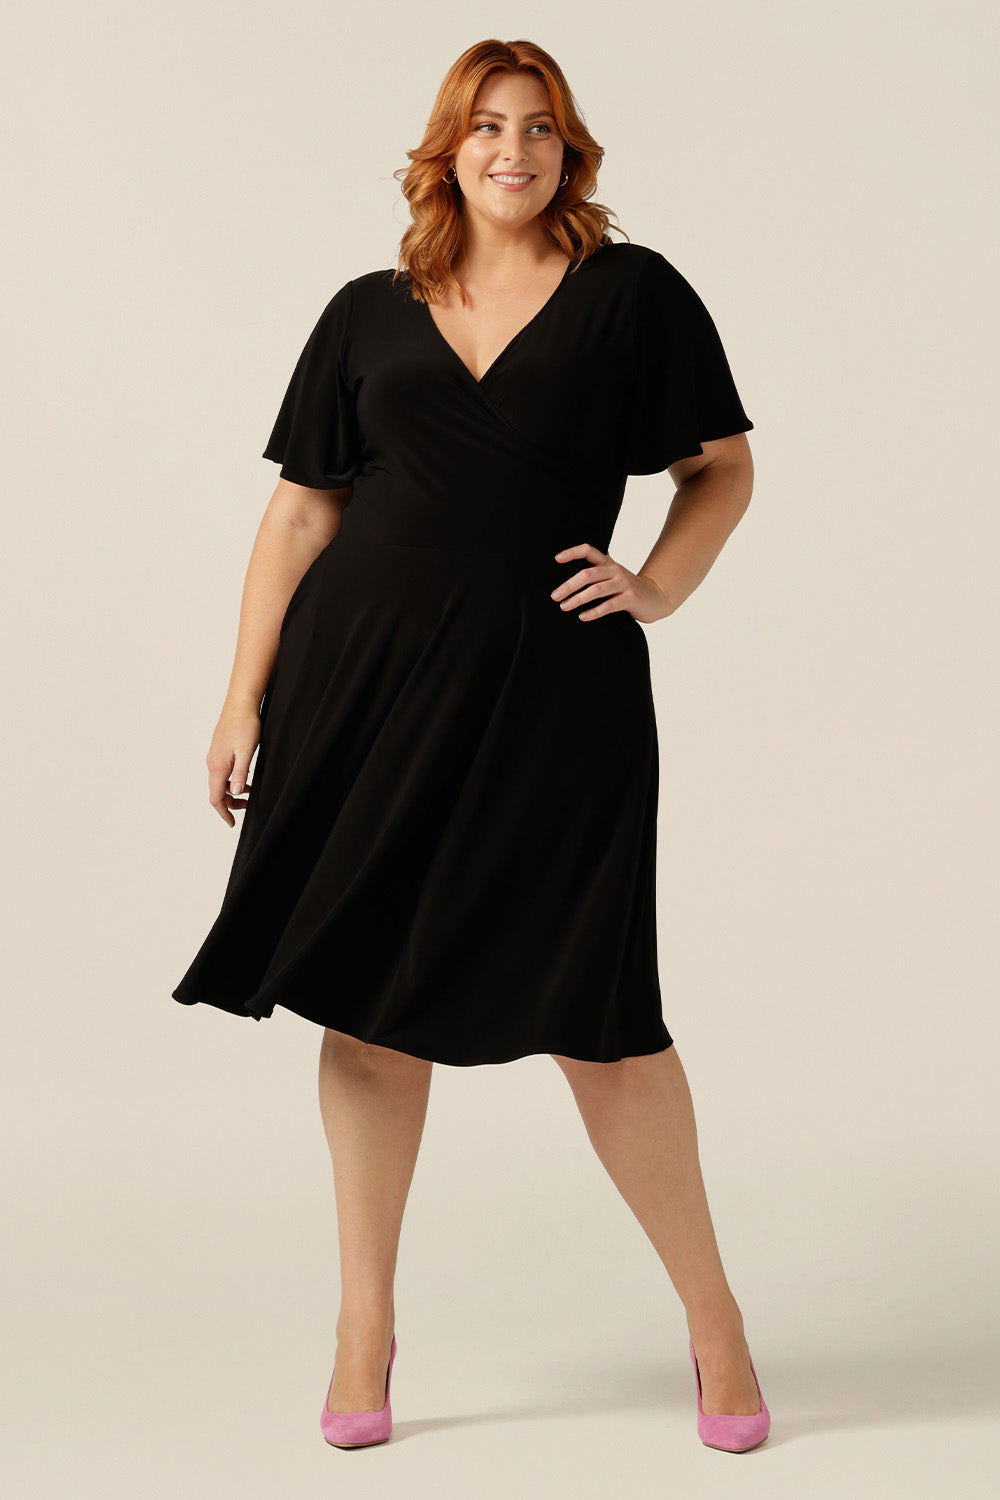 size 18, plus size woman wearing a reversible fixed wrap dress in black jersey. Worn reversed, she wears it as a boat-neck little black dress. Featuring short flutter sleeves, a knee length skirt and pockets, this dress can be worn for work wear or going-out dress style. Made in Australia by women's clothing label, Leina and Fleur